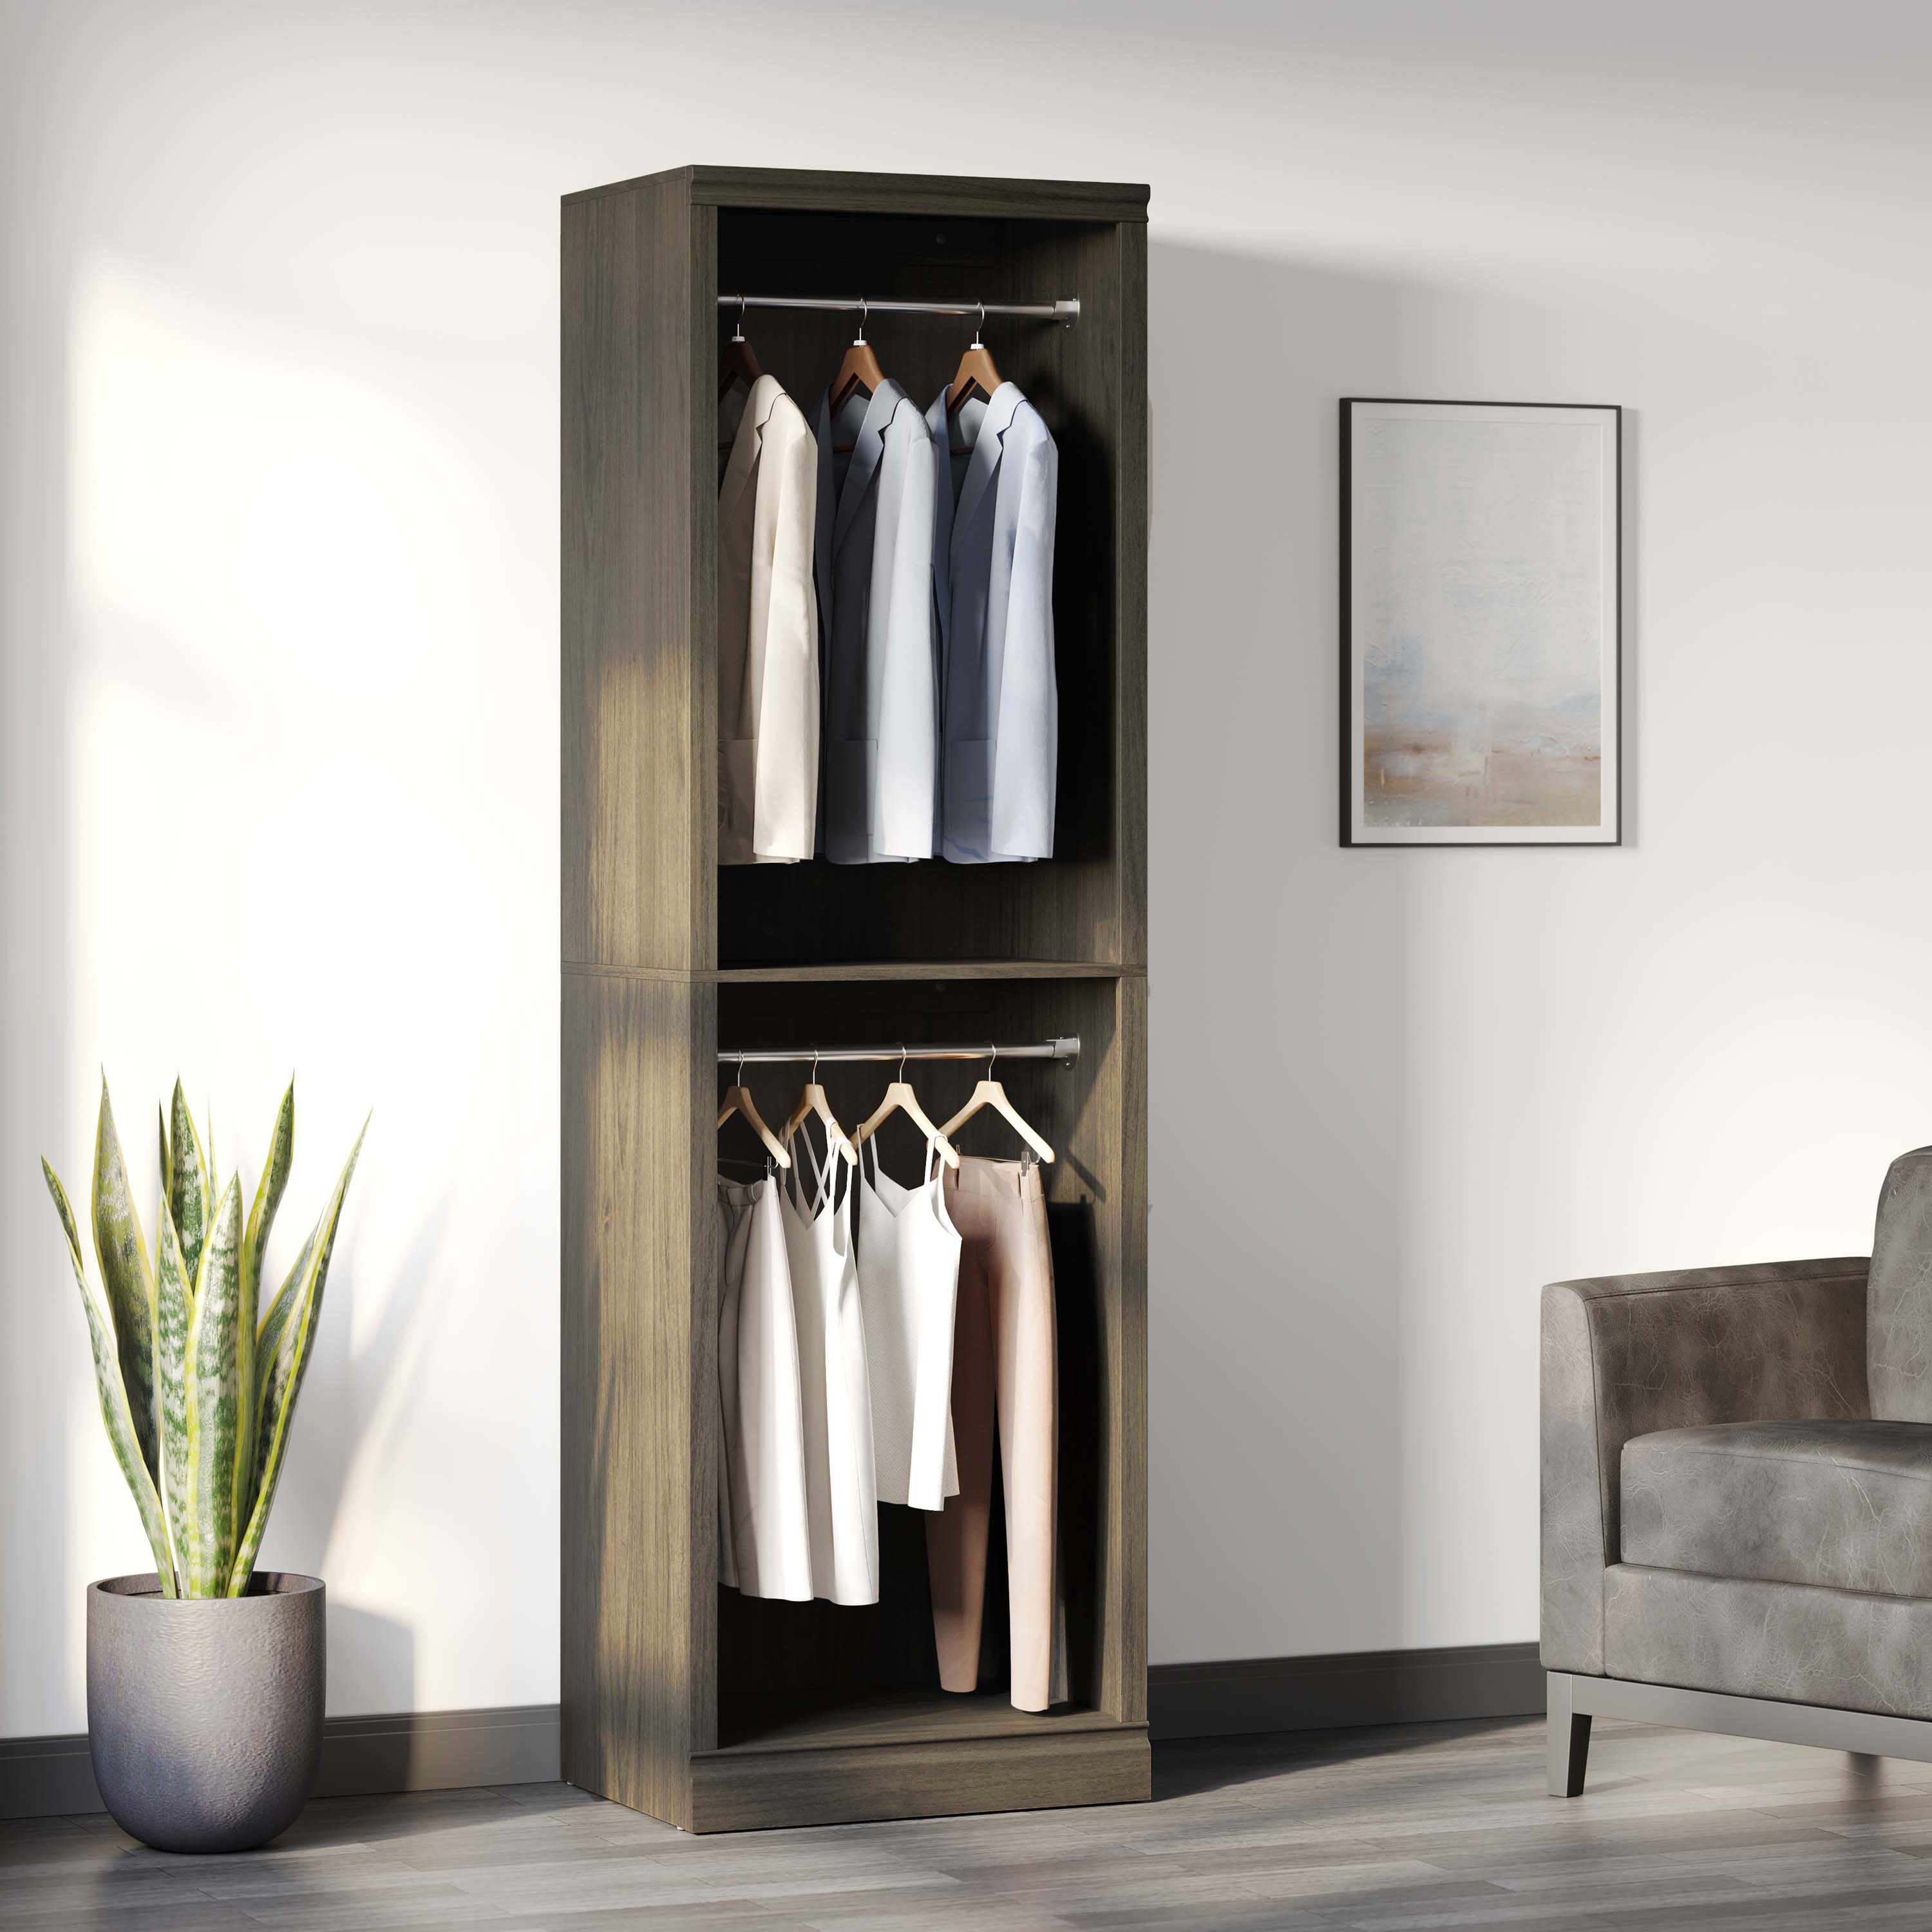 Scott Living Nolan 25" Wardrobe Closet With 2 Shelves And 2 Clothes Rod  Closet System & Reviews | Wayfair Throughout 2 Separable Wardrobes (View 4 of 20)